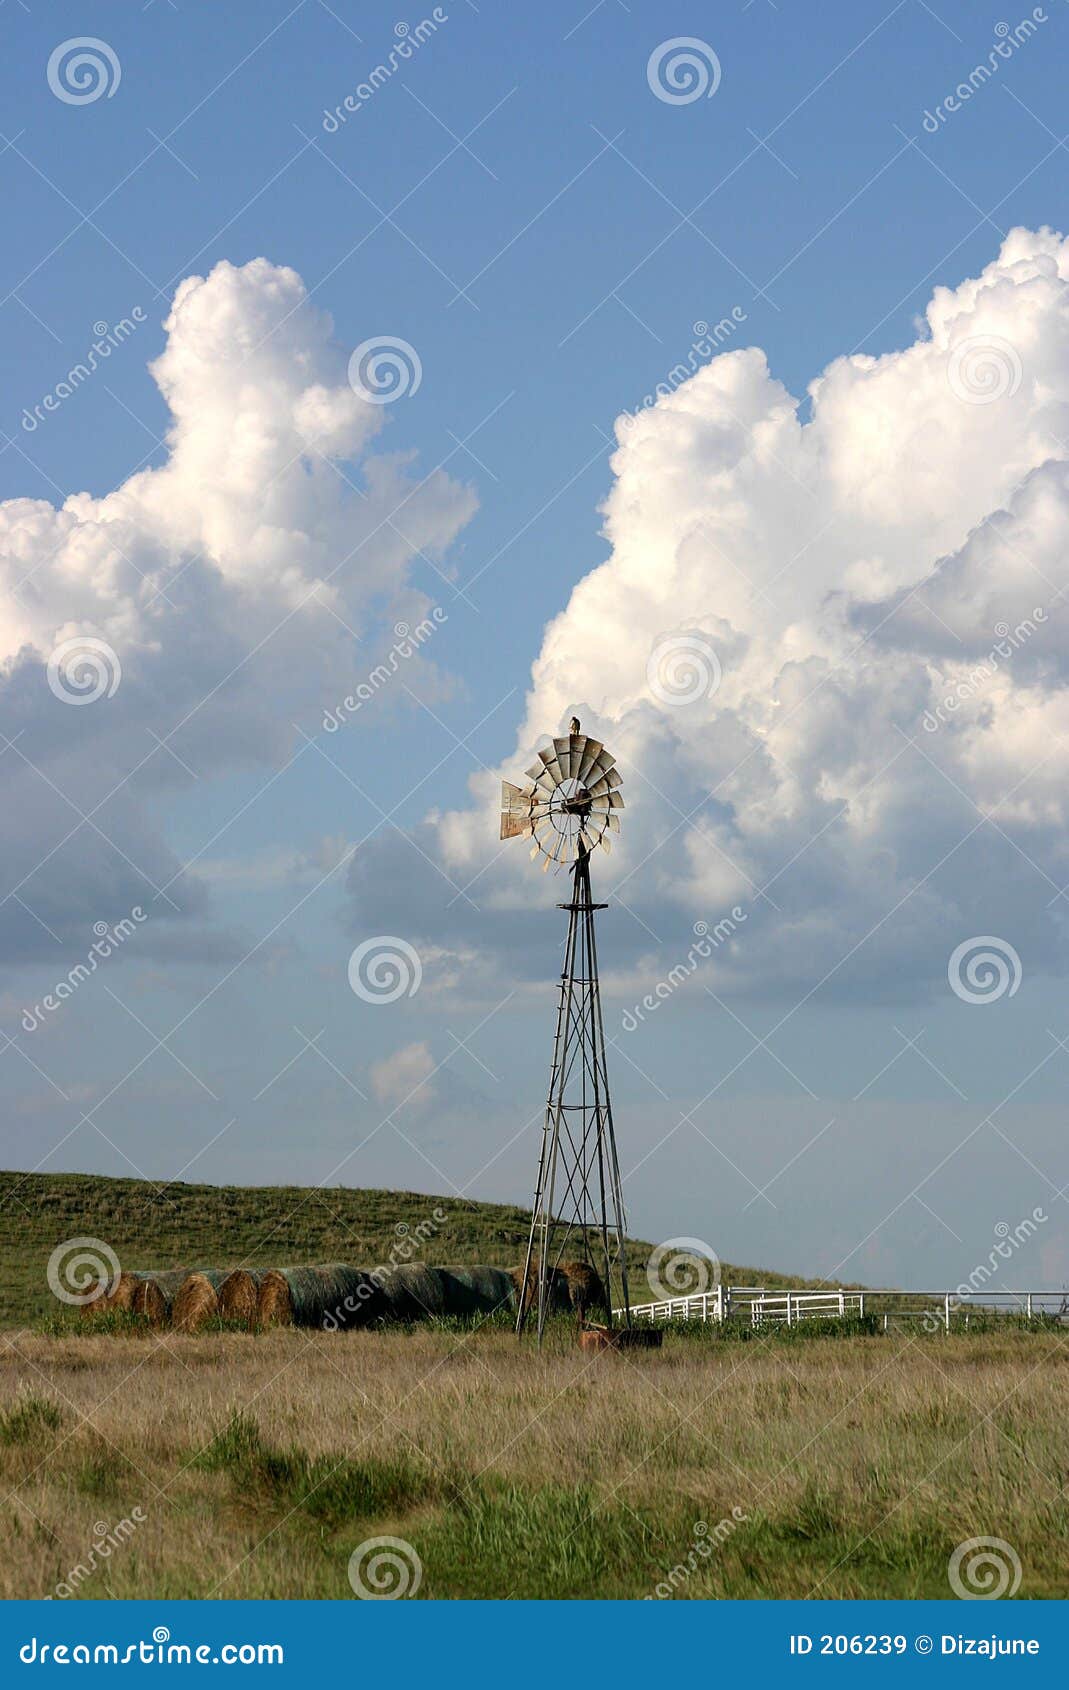 Vertical shot of windmill with water tank at base and round bales of 